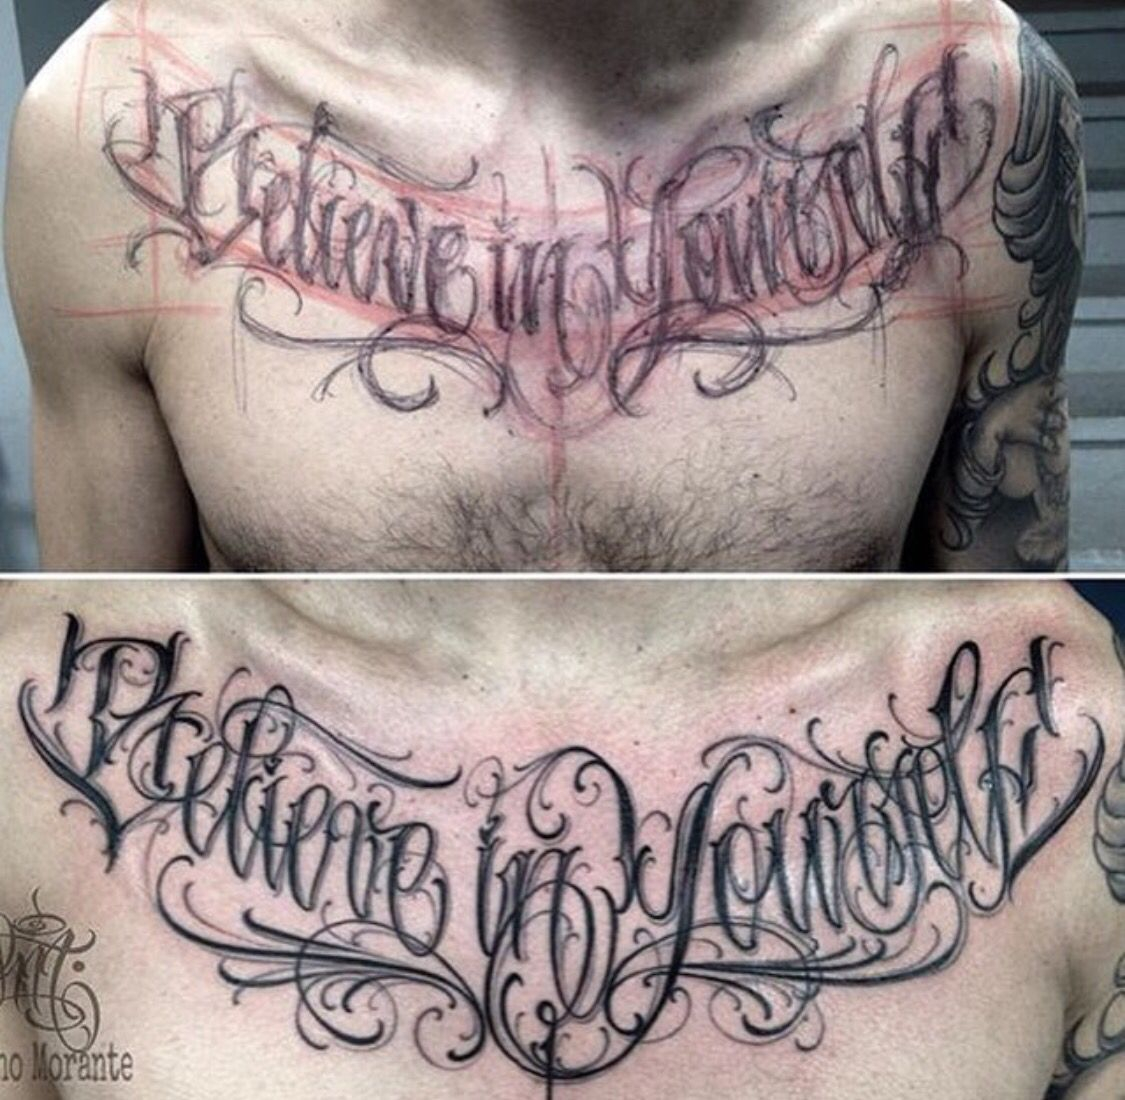 Believe In Yourself Chest Lettering Tattoo Tattoo Envy Tatuagem intended for measurements 1125 X 1100